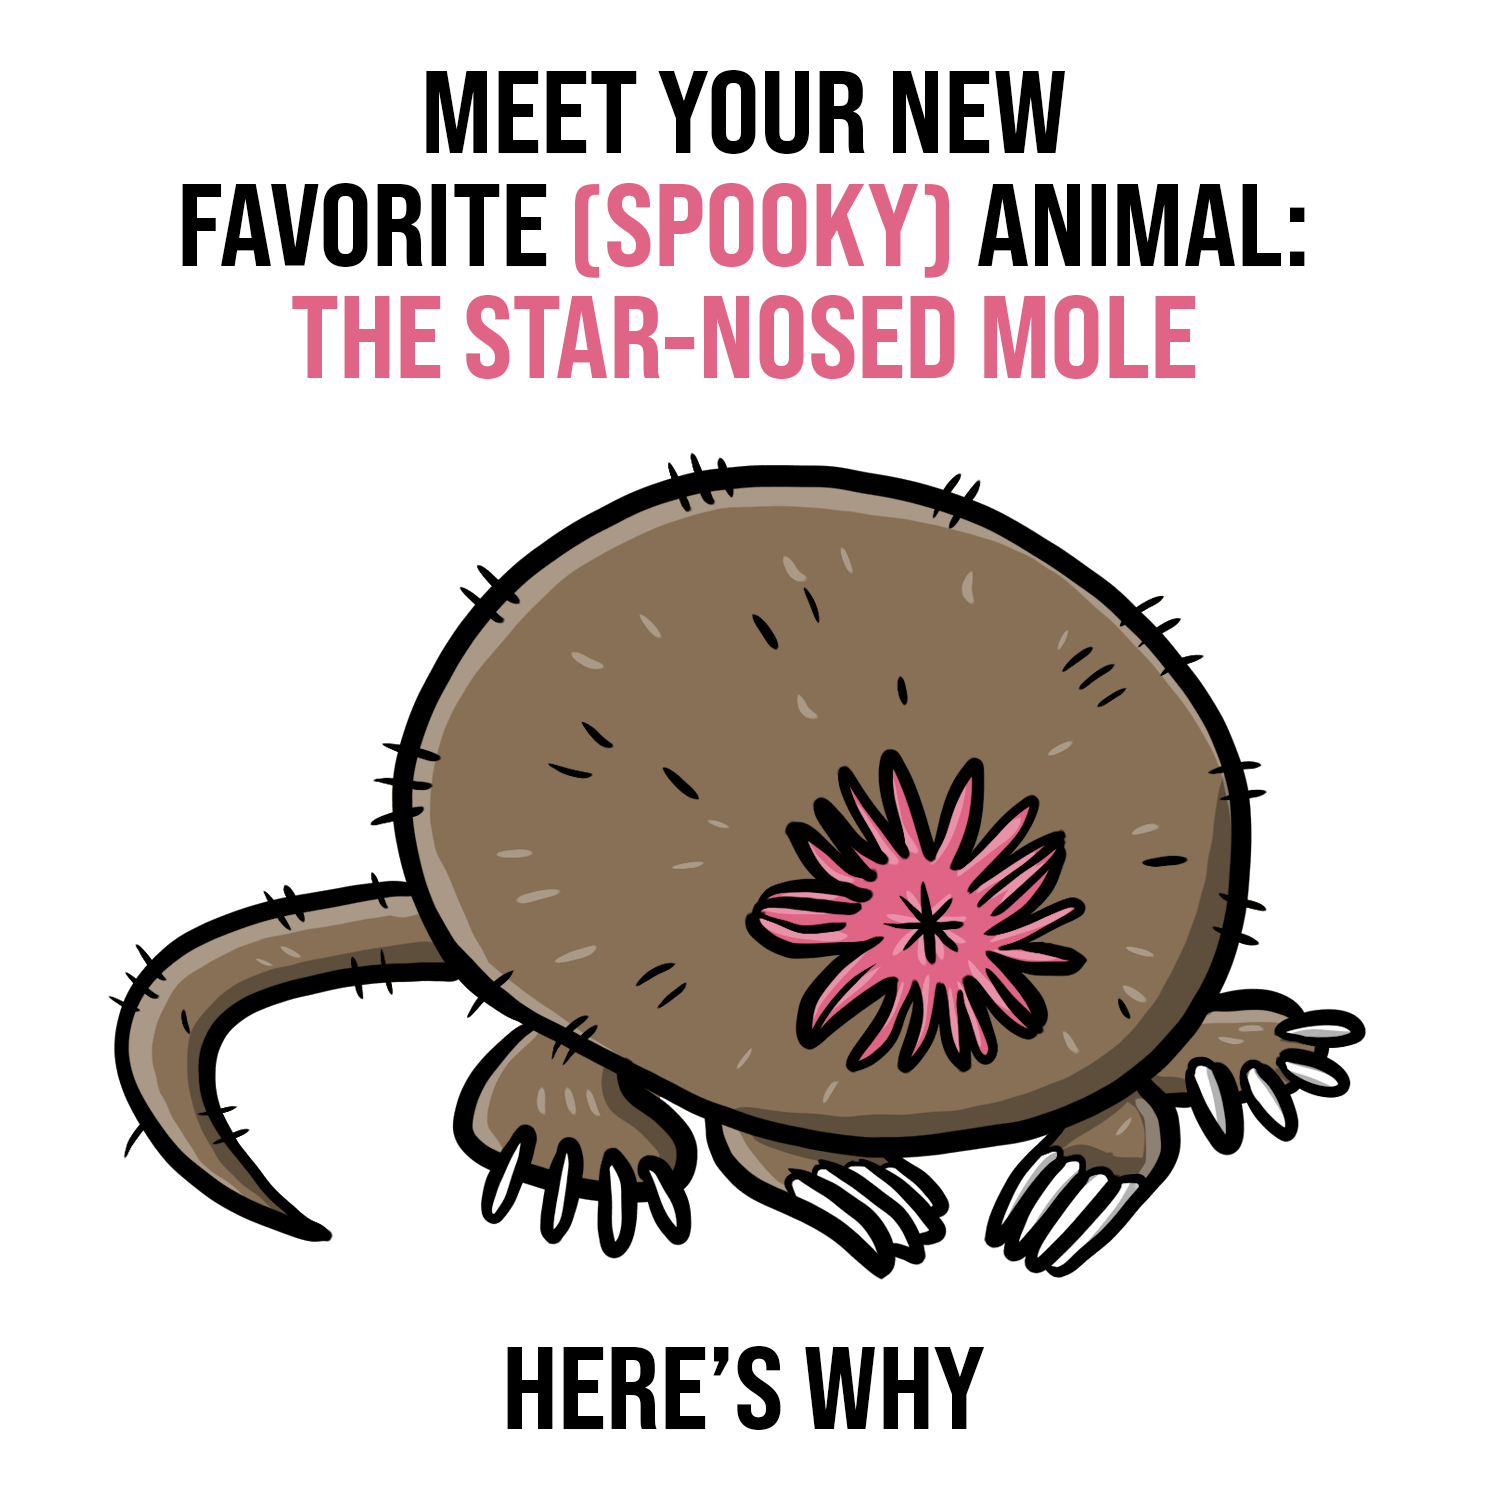 Your New Favorite Animal: The Star-Nosed Mole